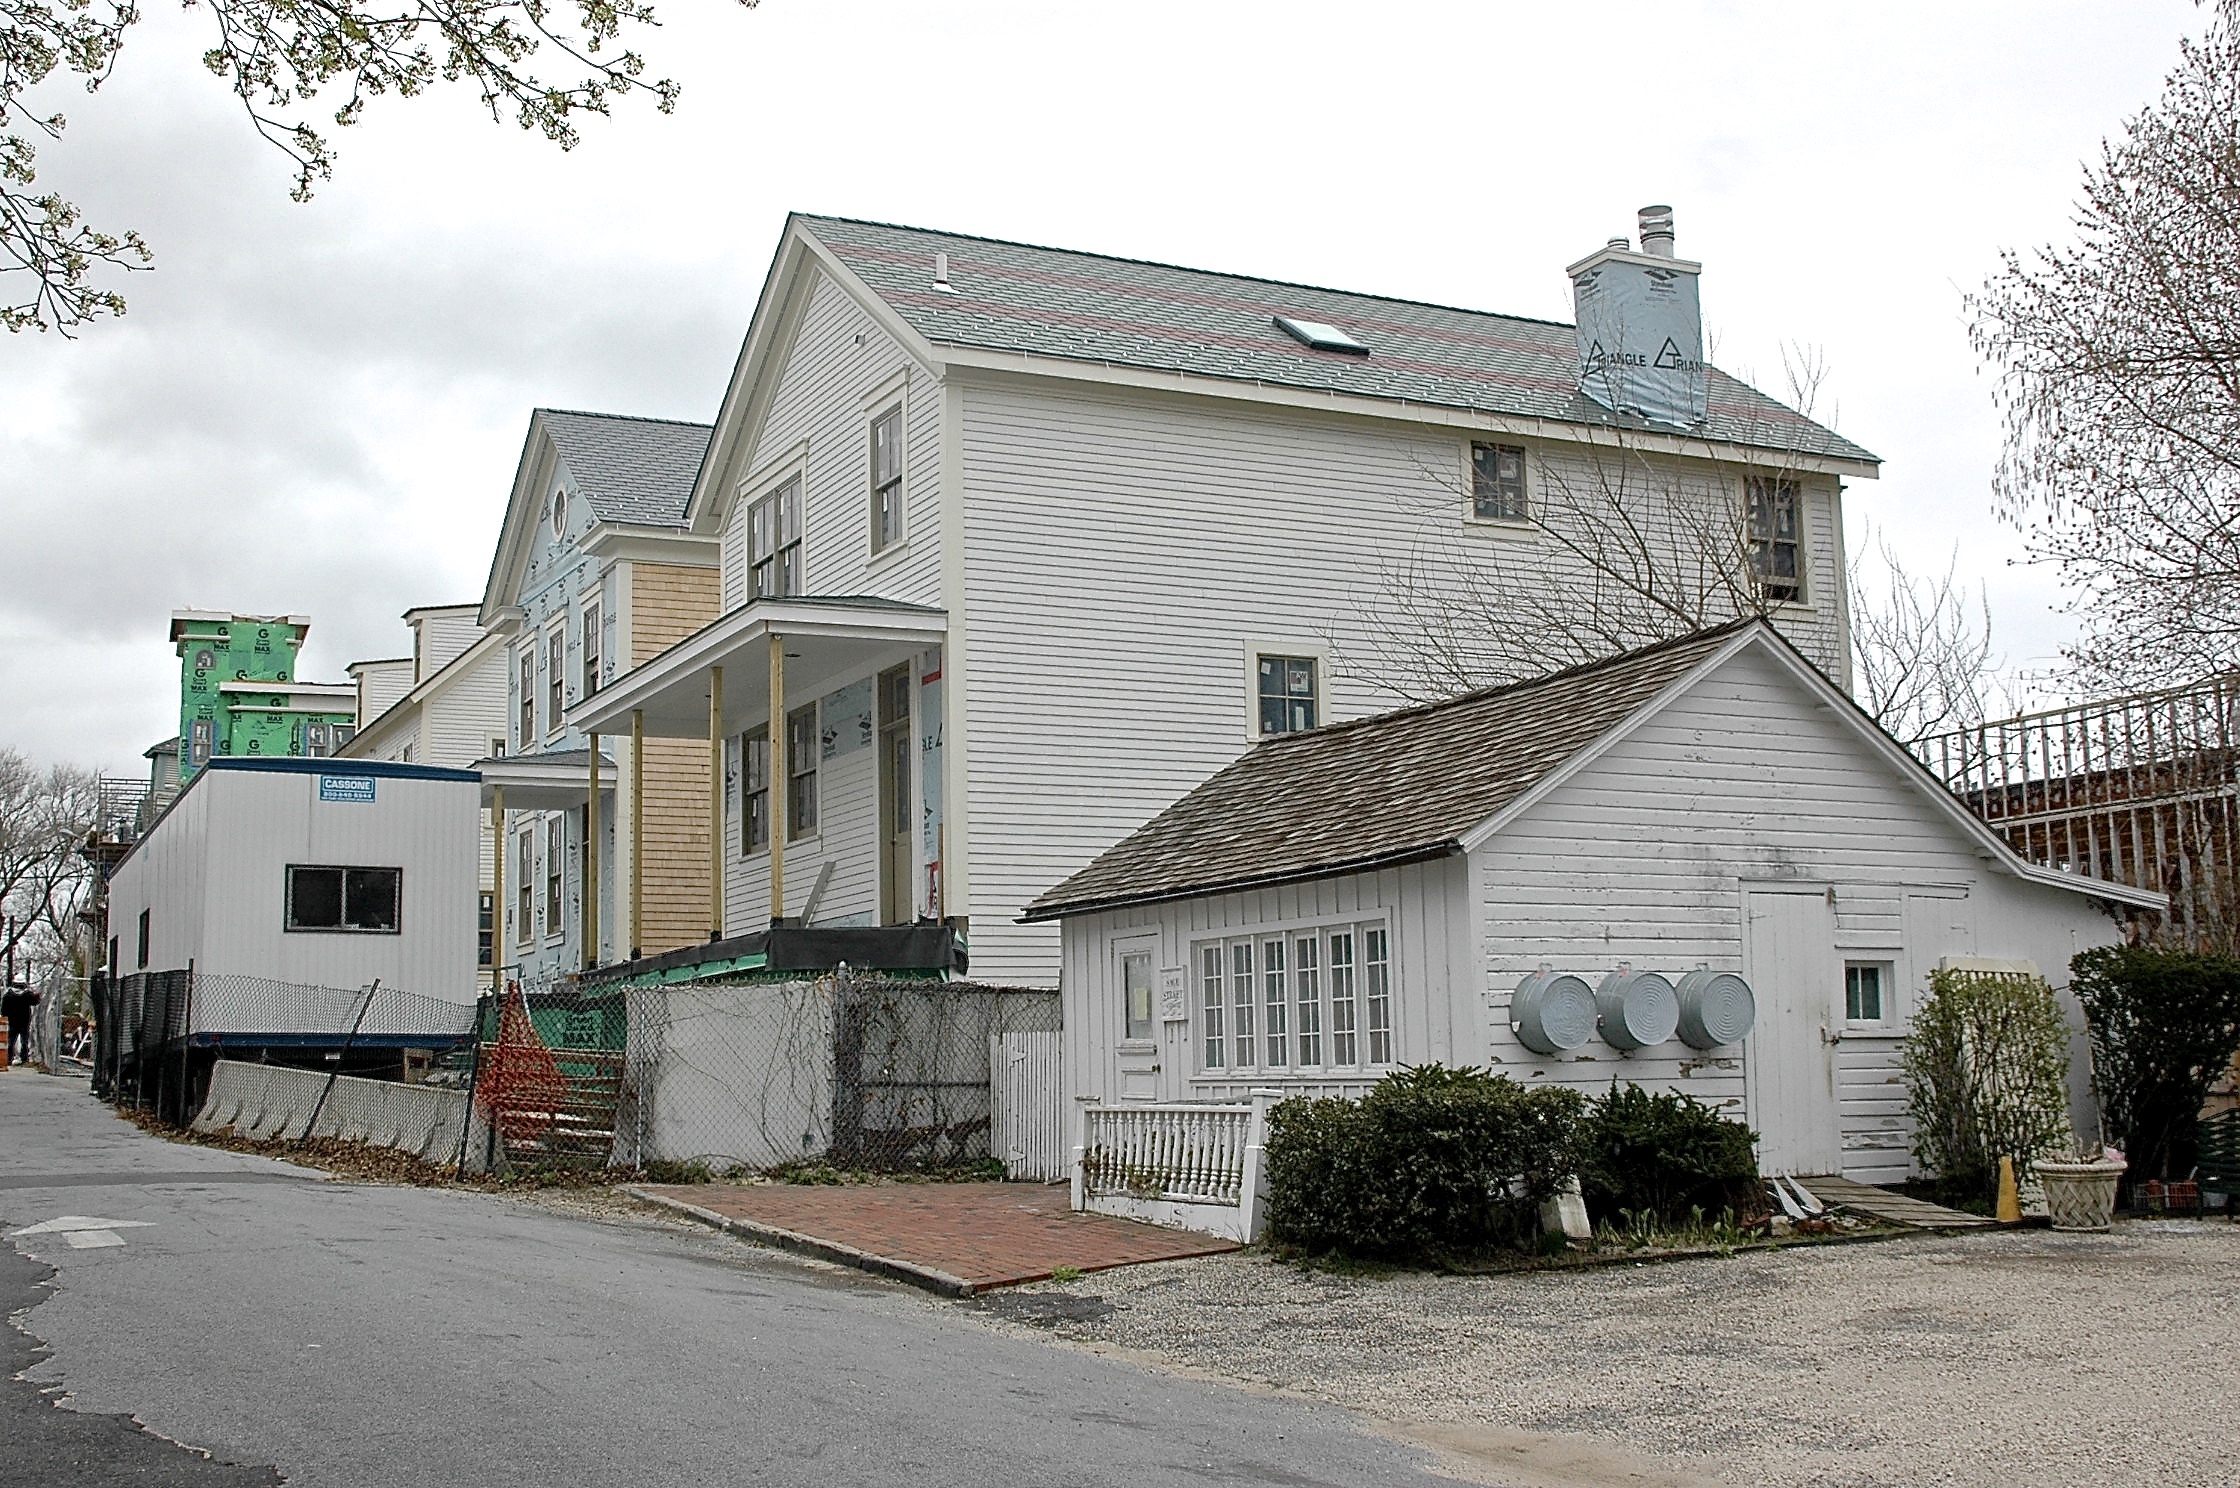 Taken while the Watchcase townhouses were under construction in Sag Harbor in 2014. The little building in the foreground on Sage Street is completely dwarfed by its new neighbor.